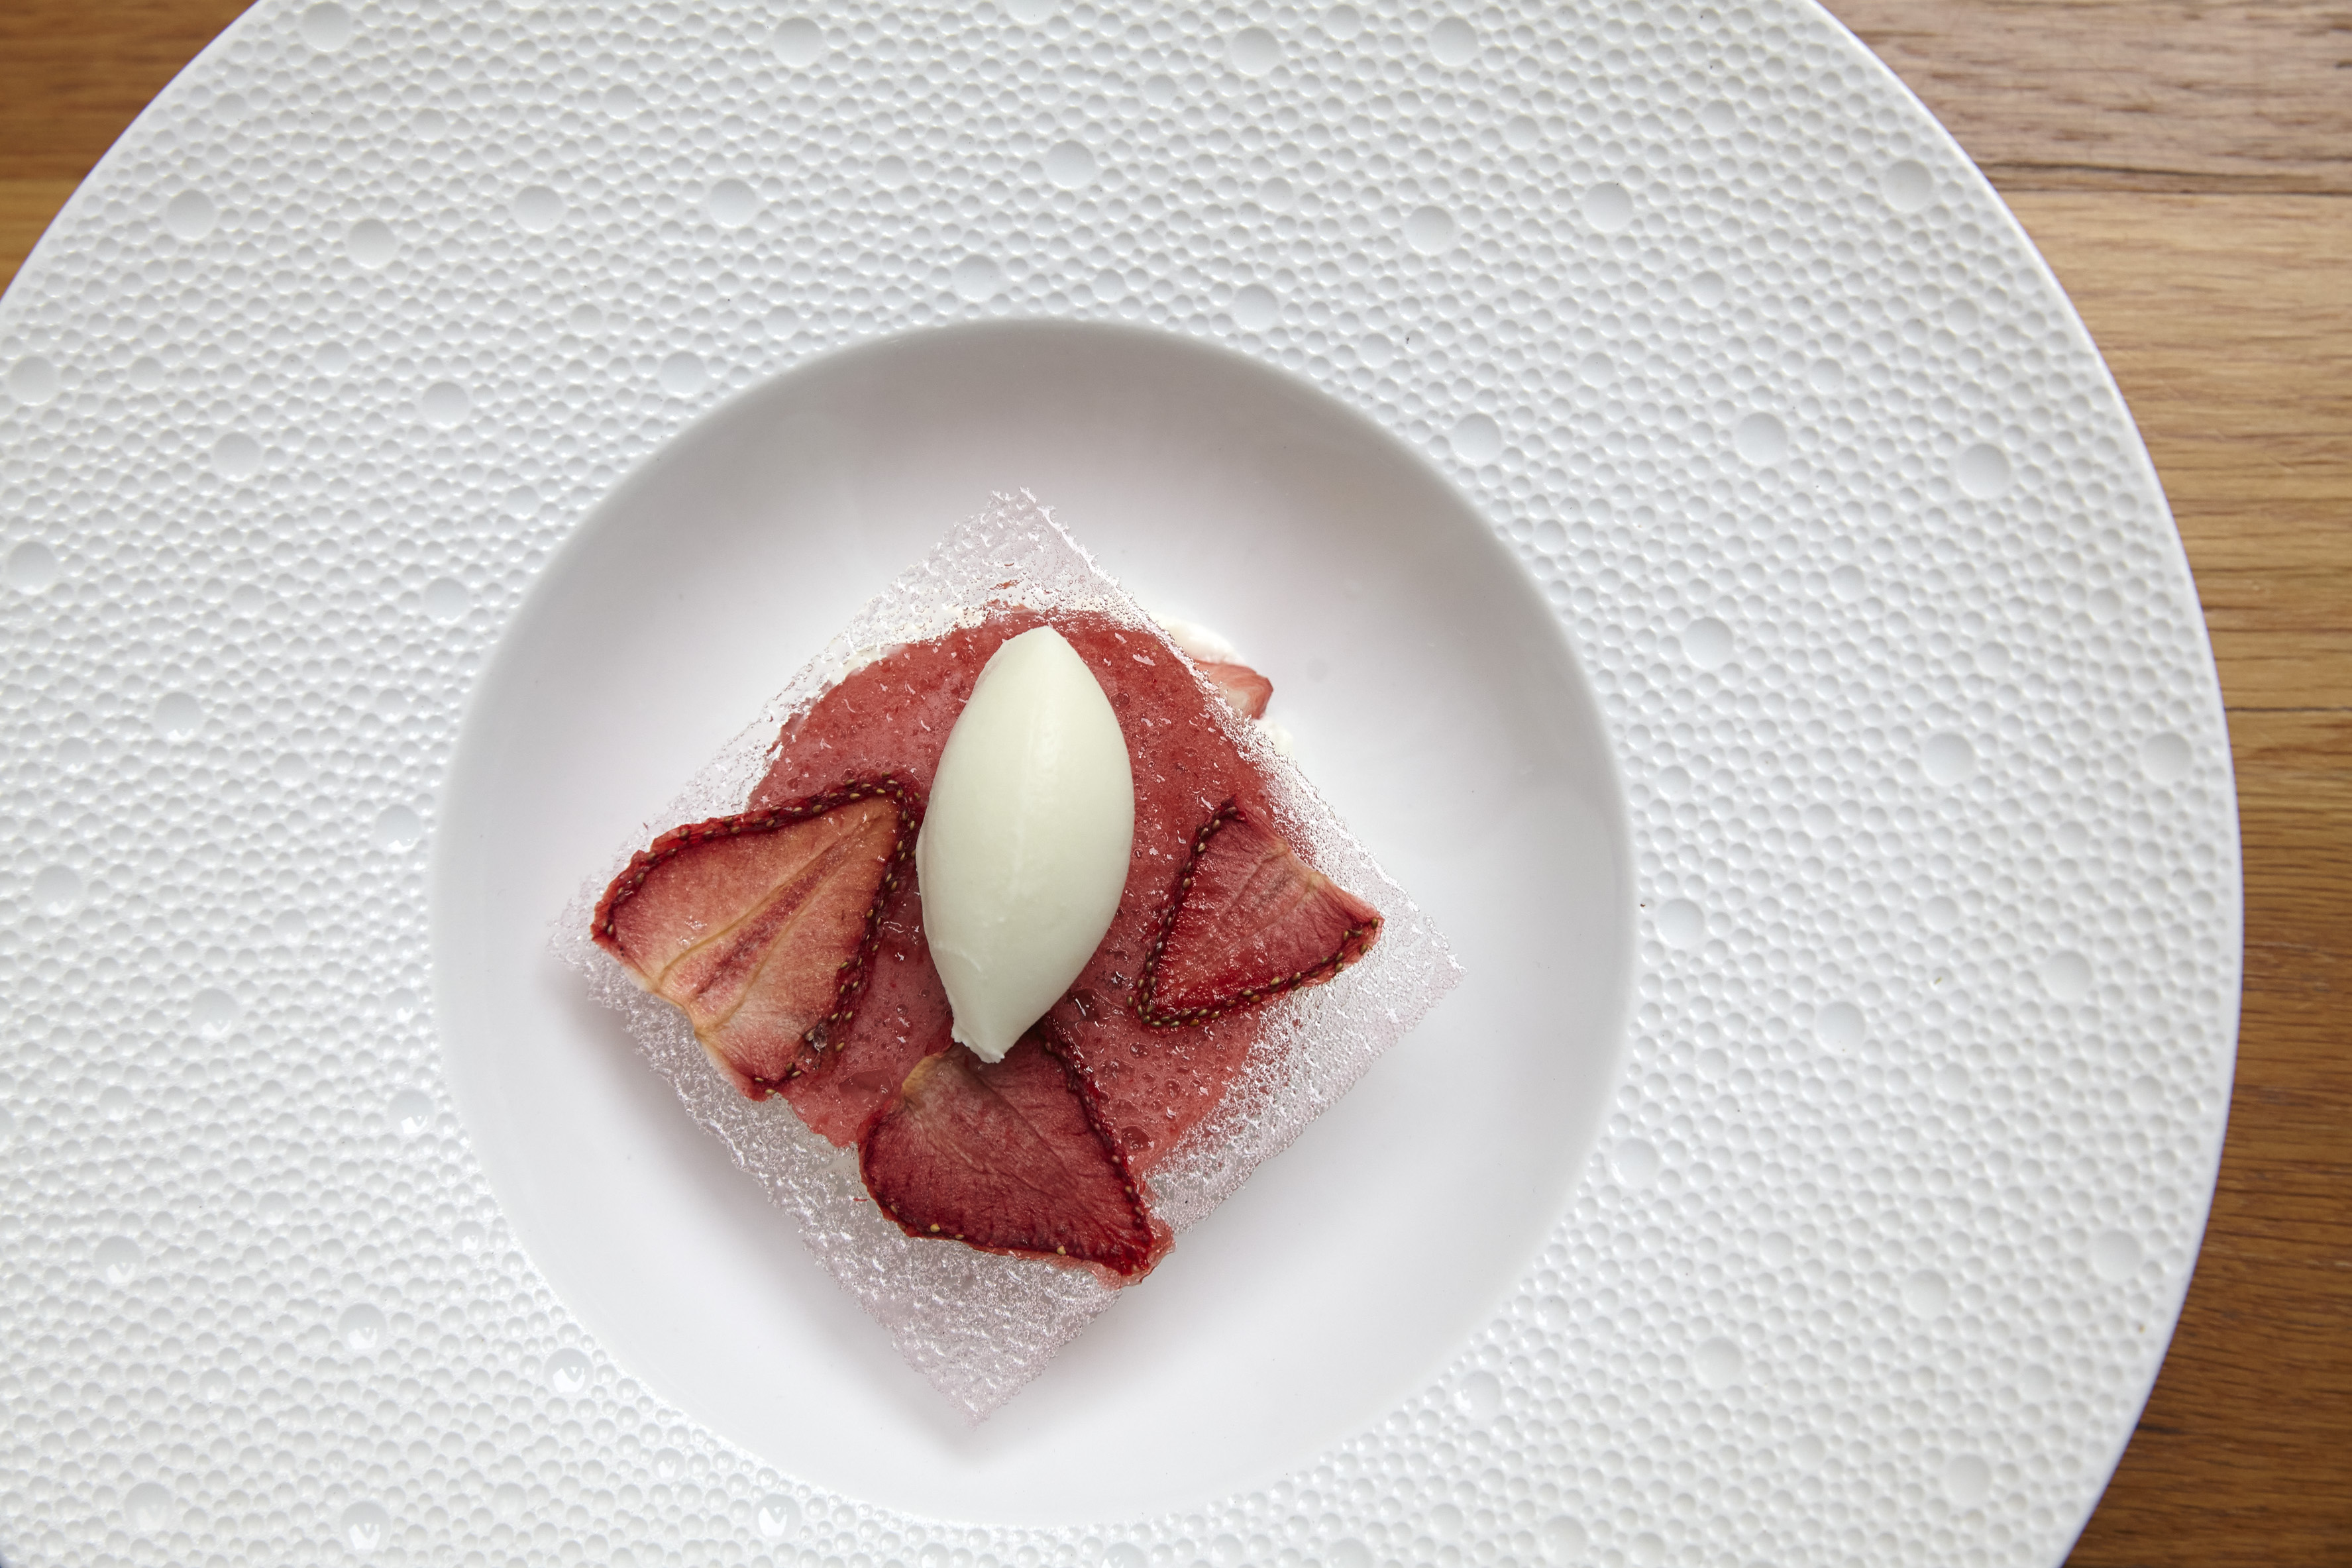 Hedone restaurant closes in London with Michelin star acclaim